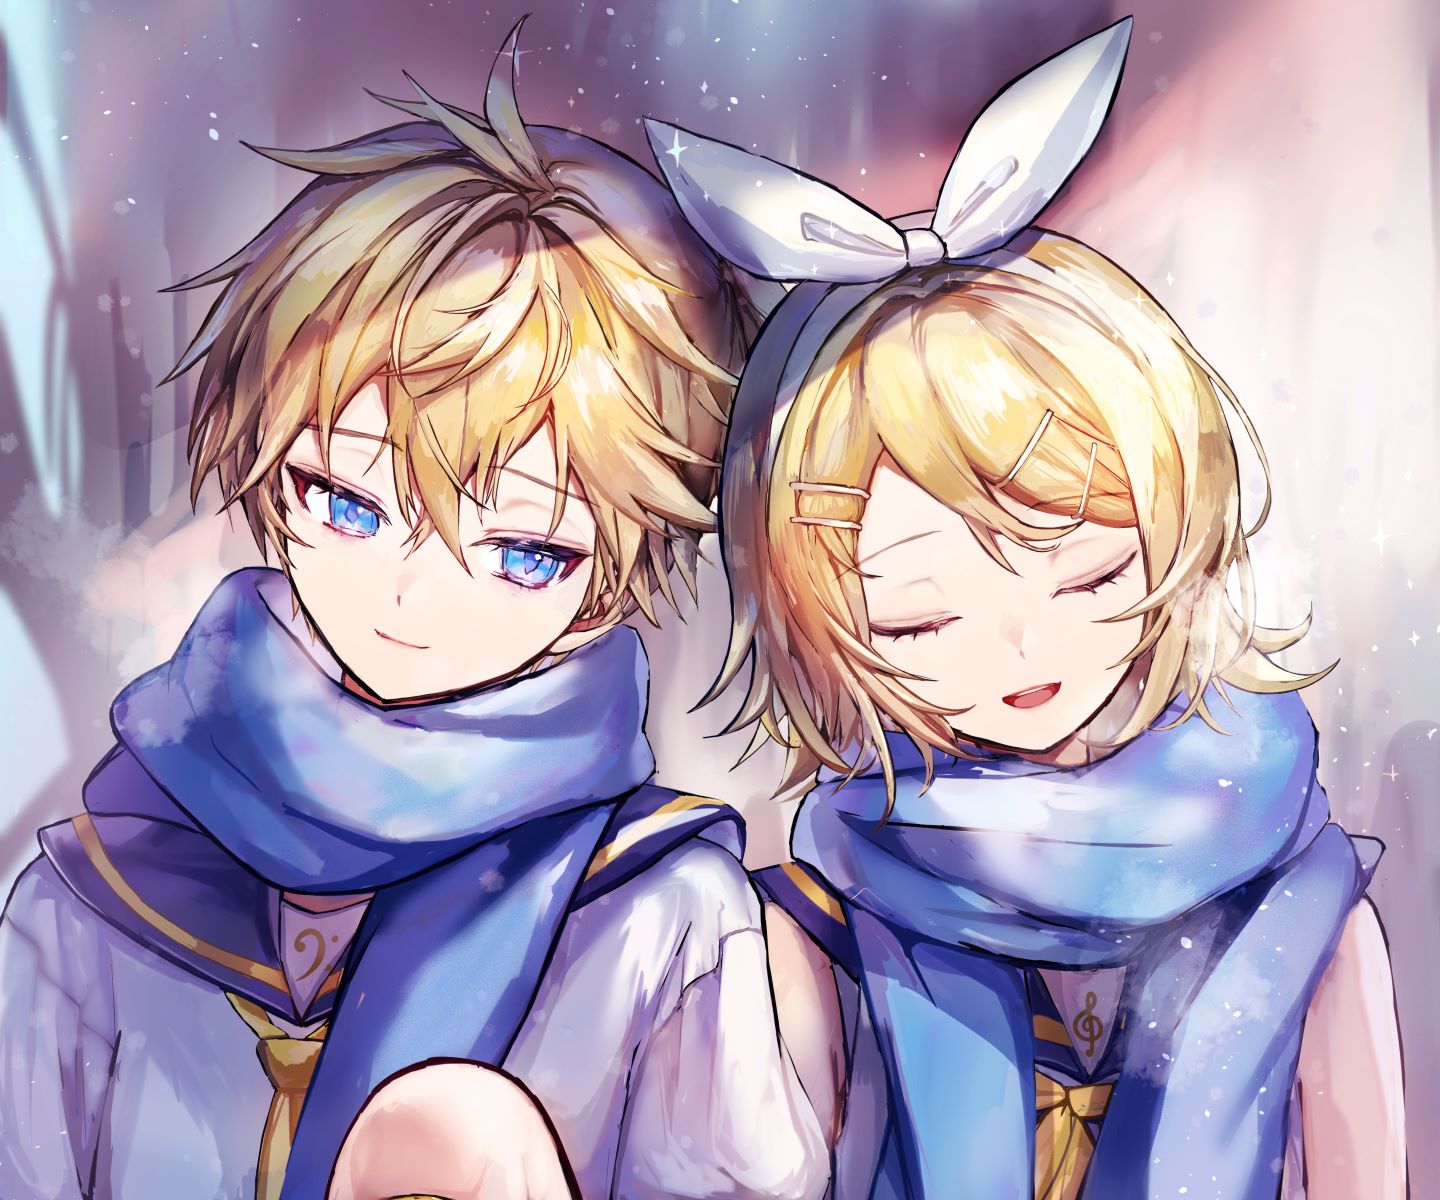 The Surprising Truth About Rin And Len's Relationship In Vocaloid!